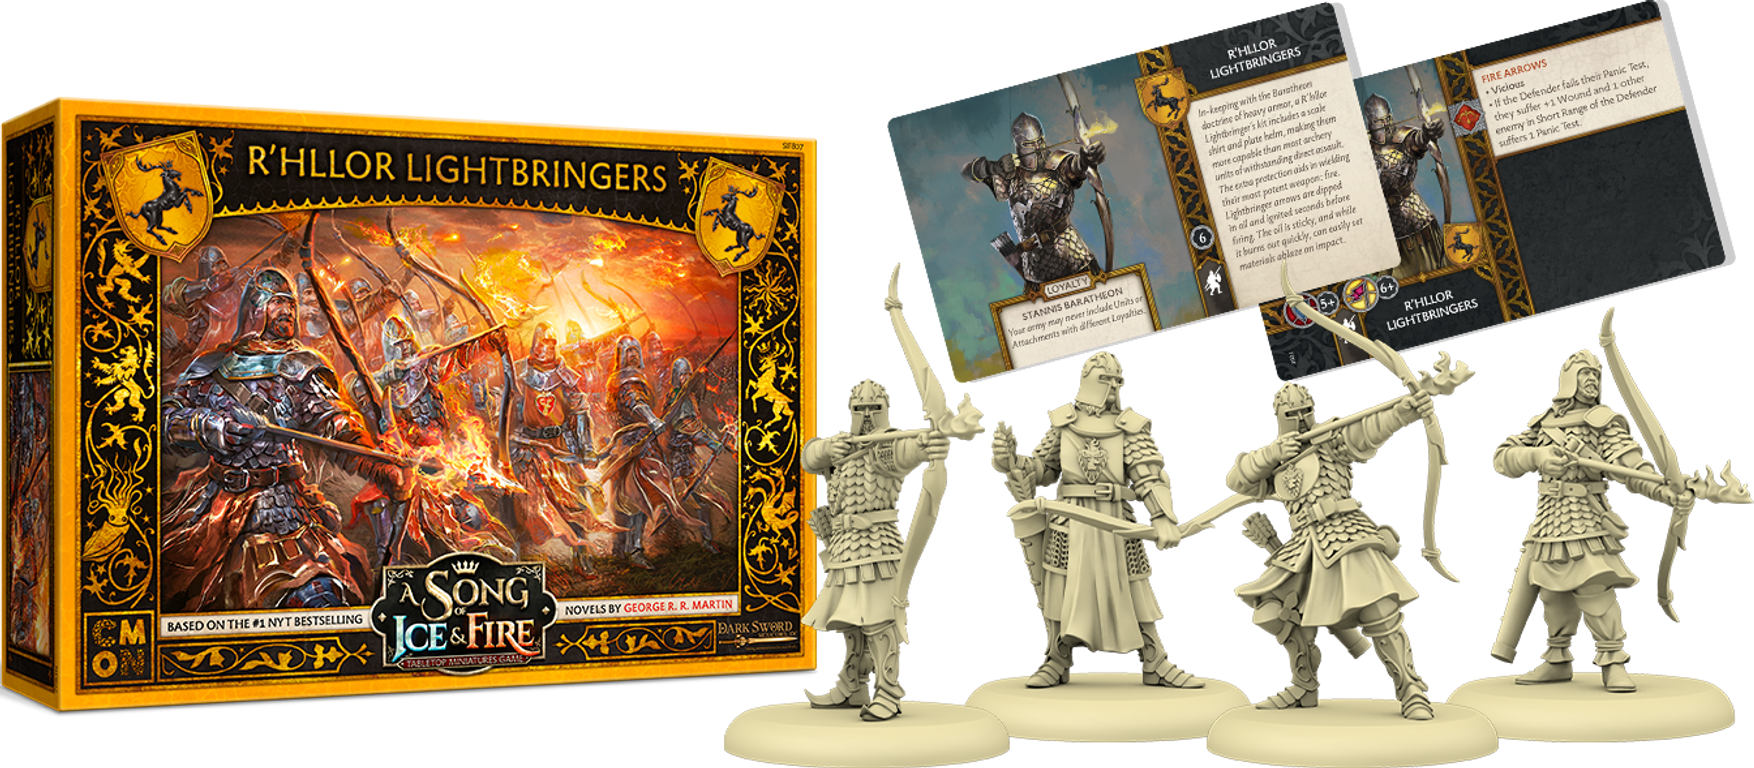 A Song of Ice & Fire: Tabletop Miniatures Game – R'hllor Lightbringers componenti